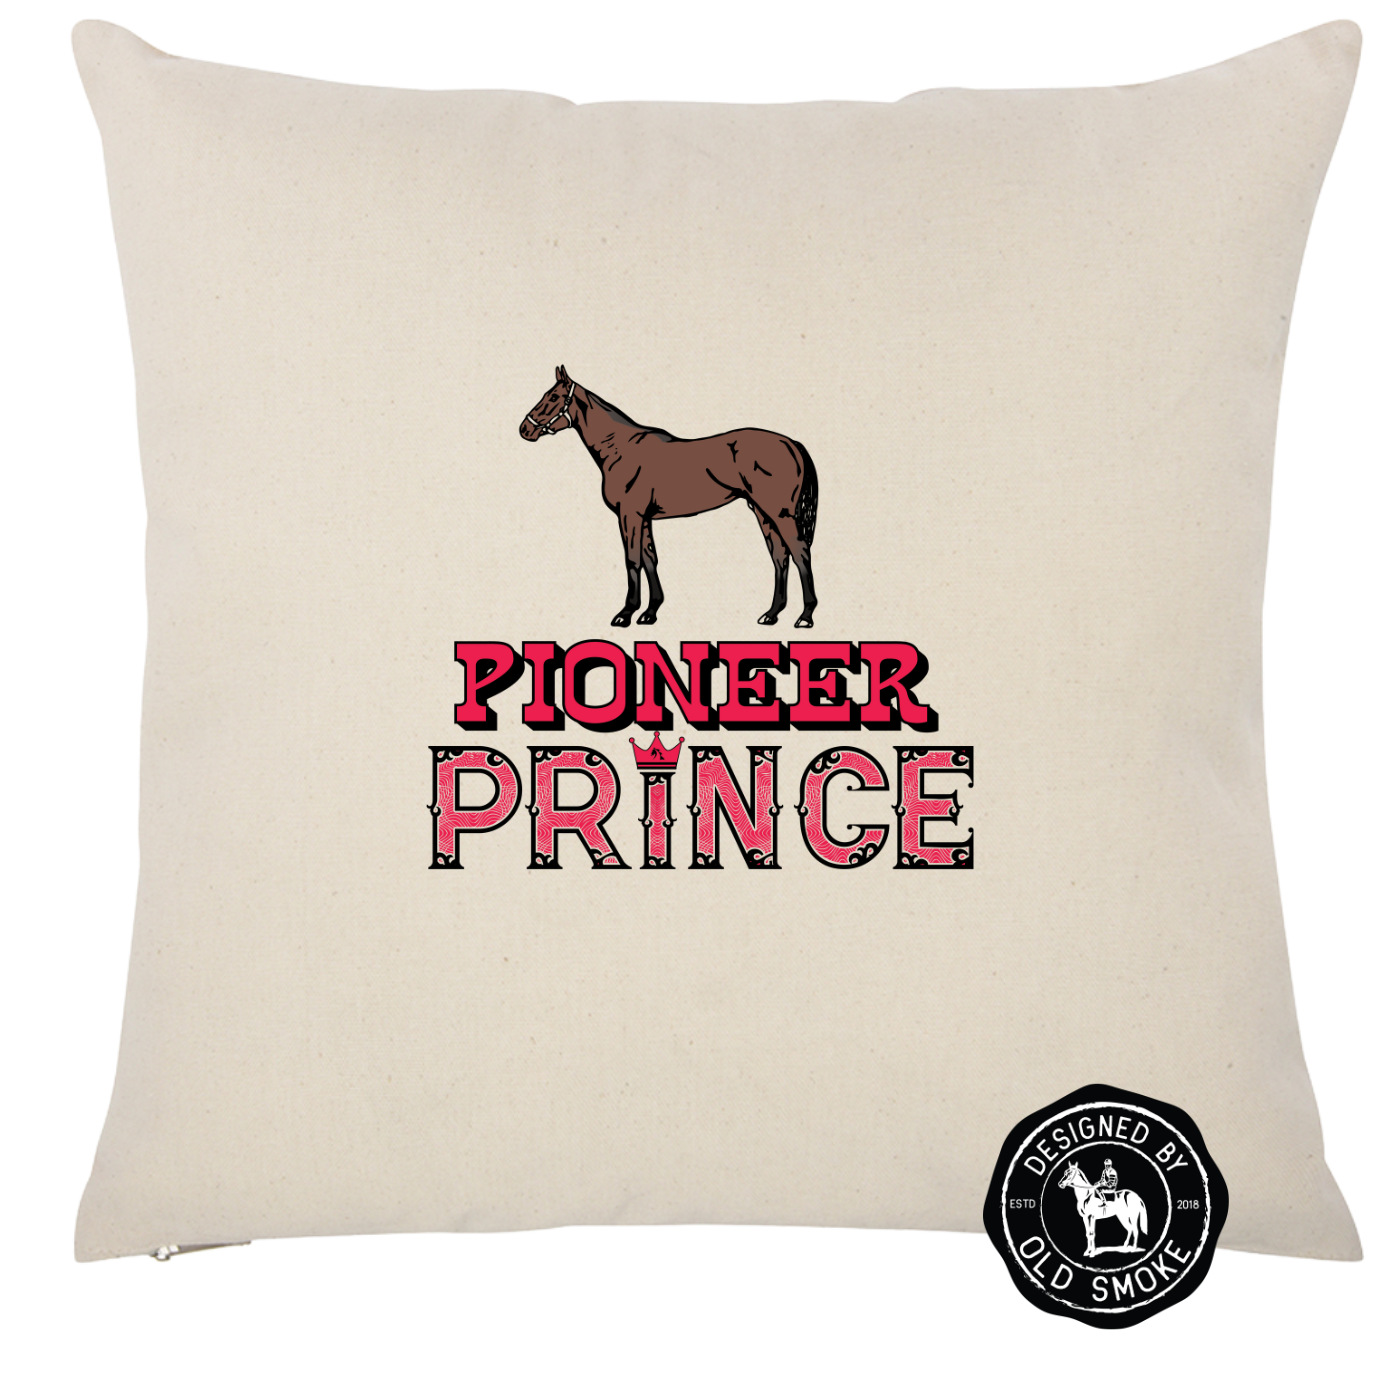 Pioneer Prince Throw Pillow Case